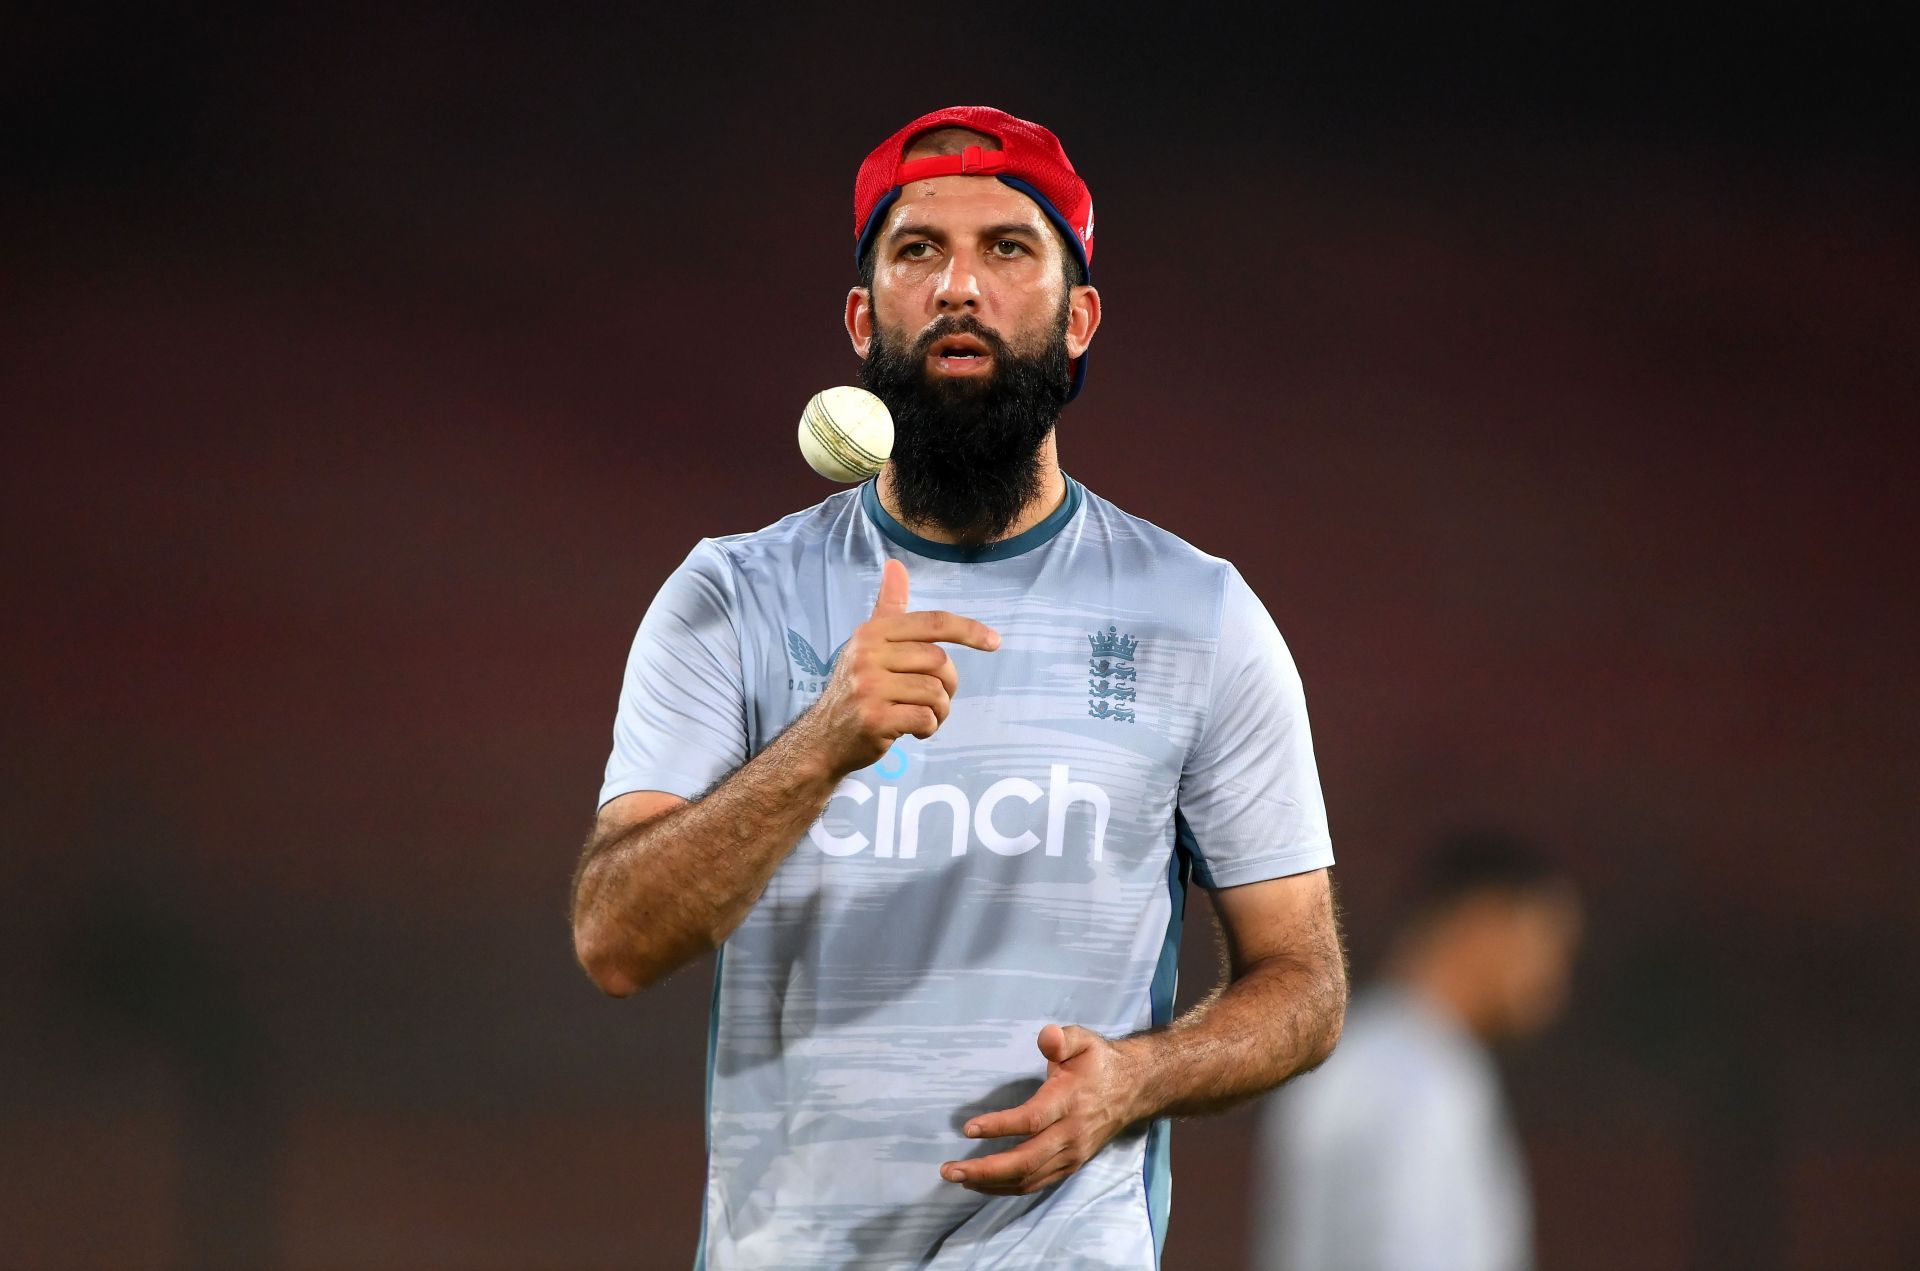 Moeen Ali is one of the most exciting all-rounders today. (Credits: Getty)